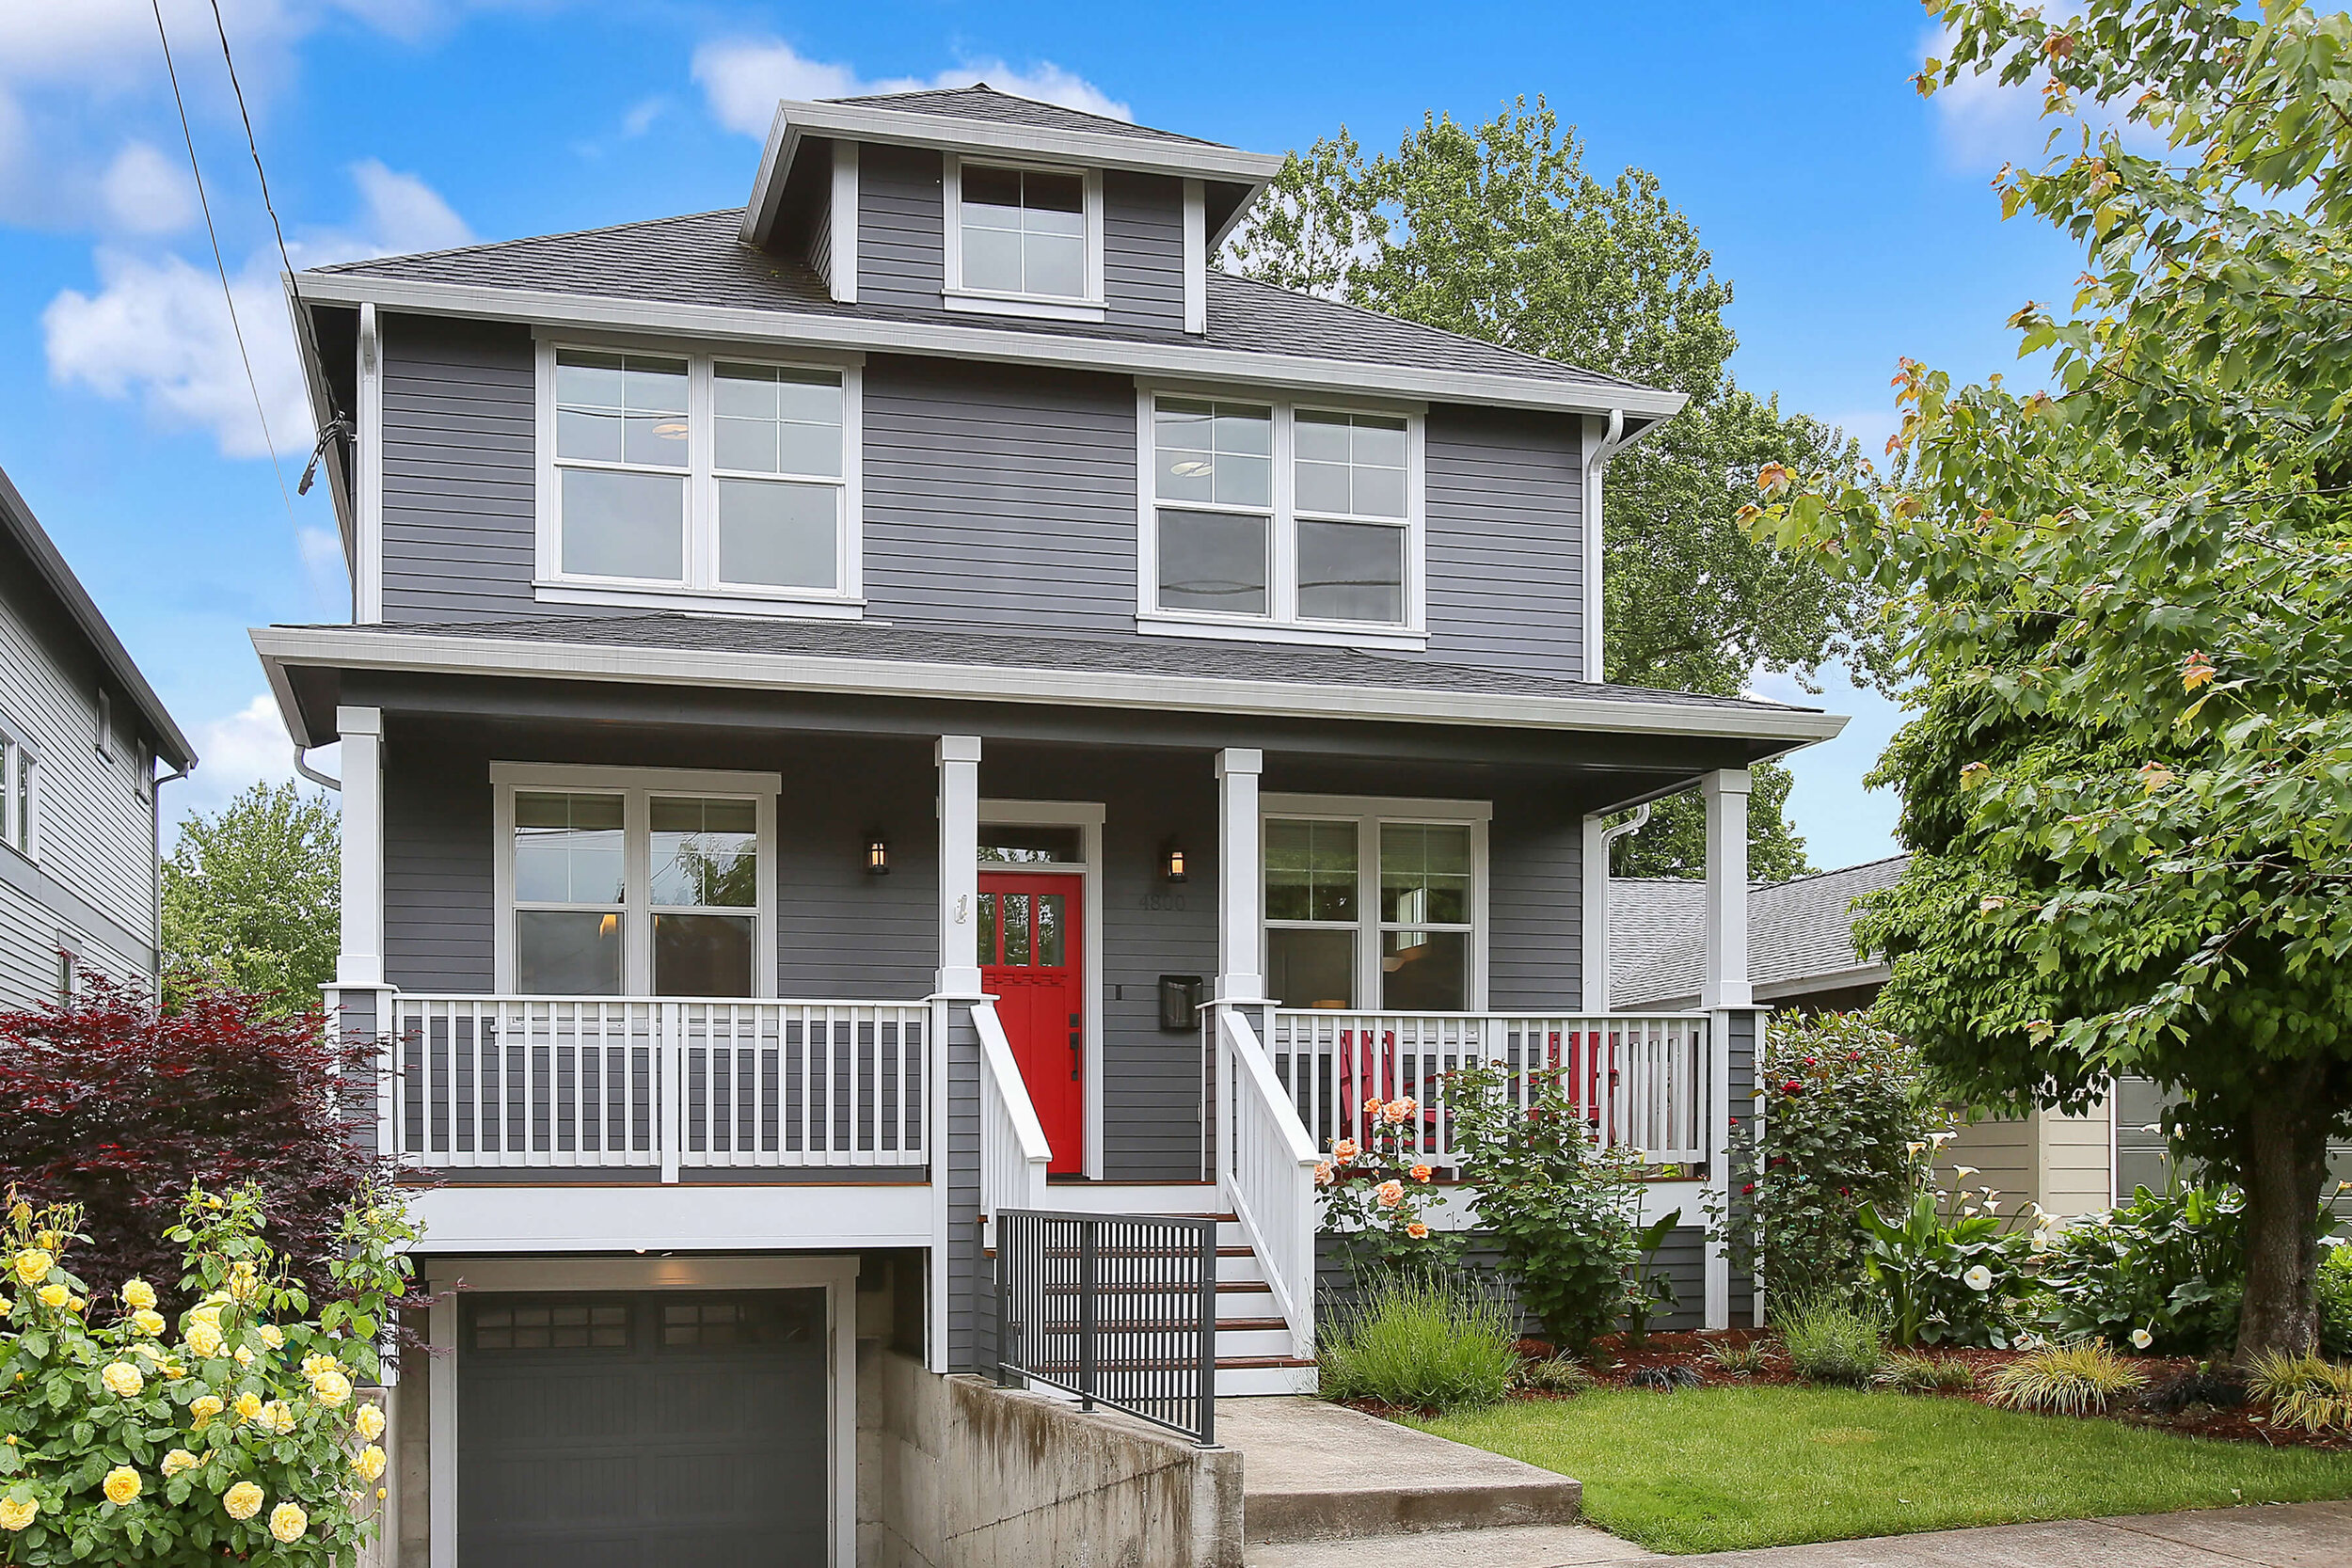  4800 NE 35th Ave.&lt;Strong&gt;SOLD&lt;/Strong&gt;